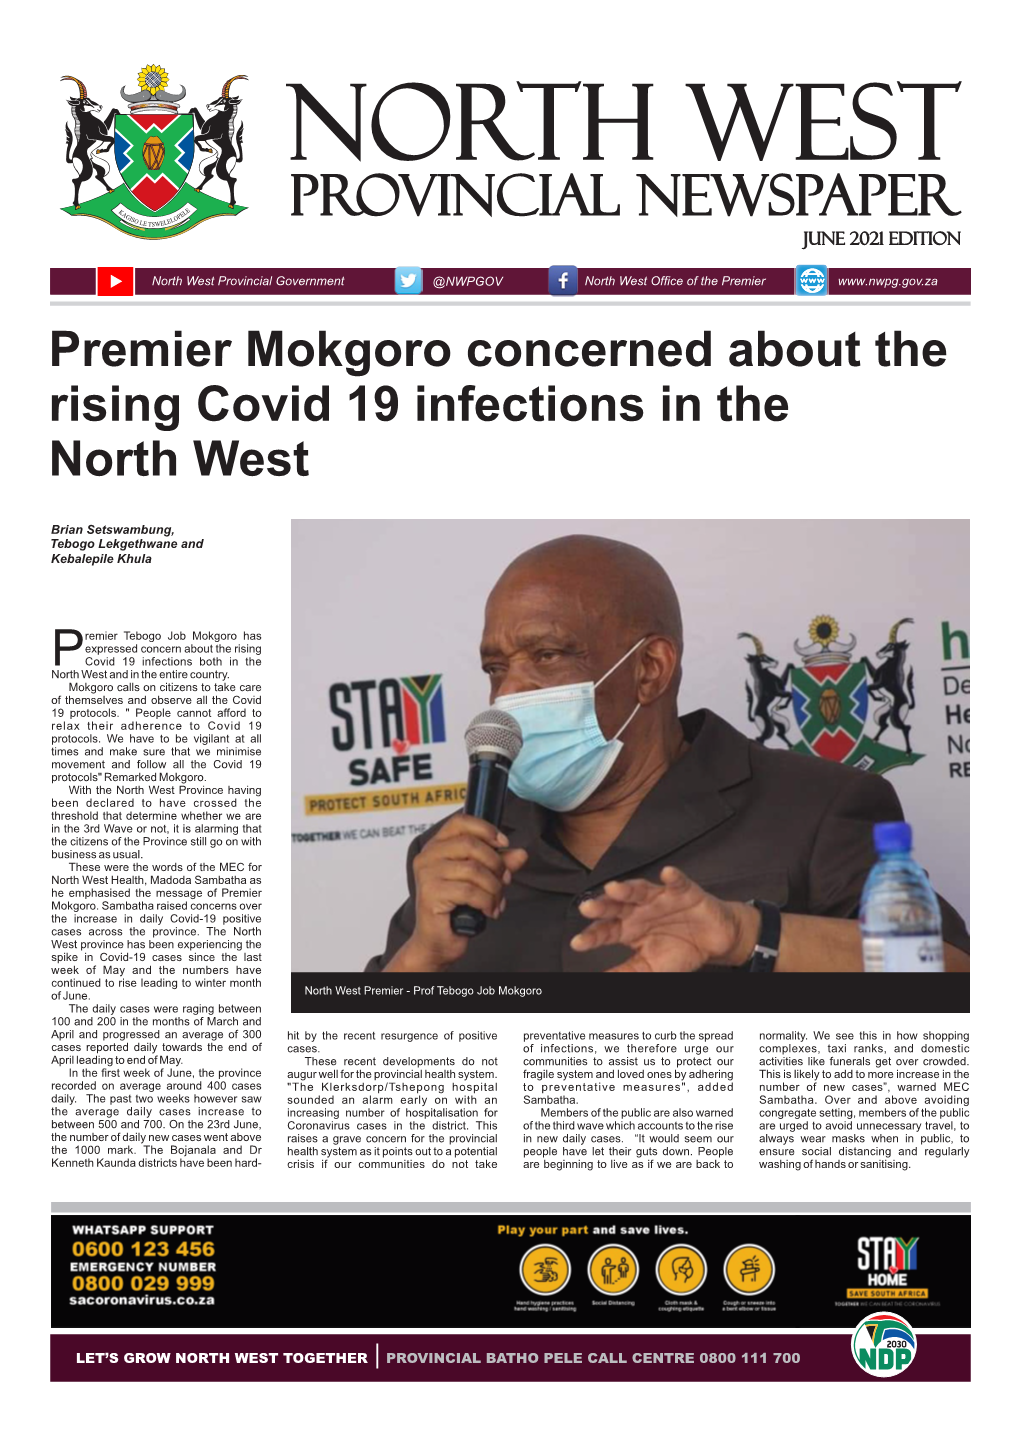 North West Provincial Newspaper June 2021 Edition